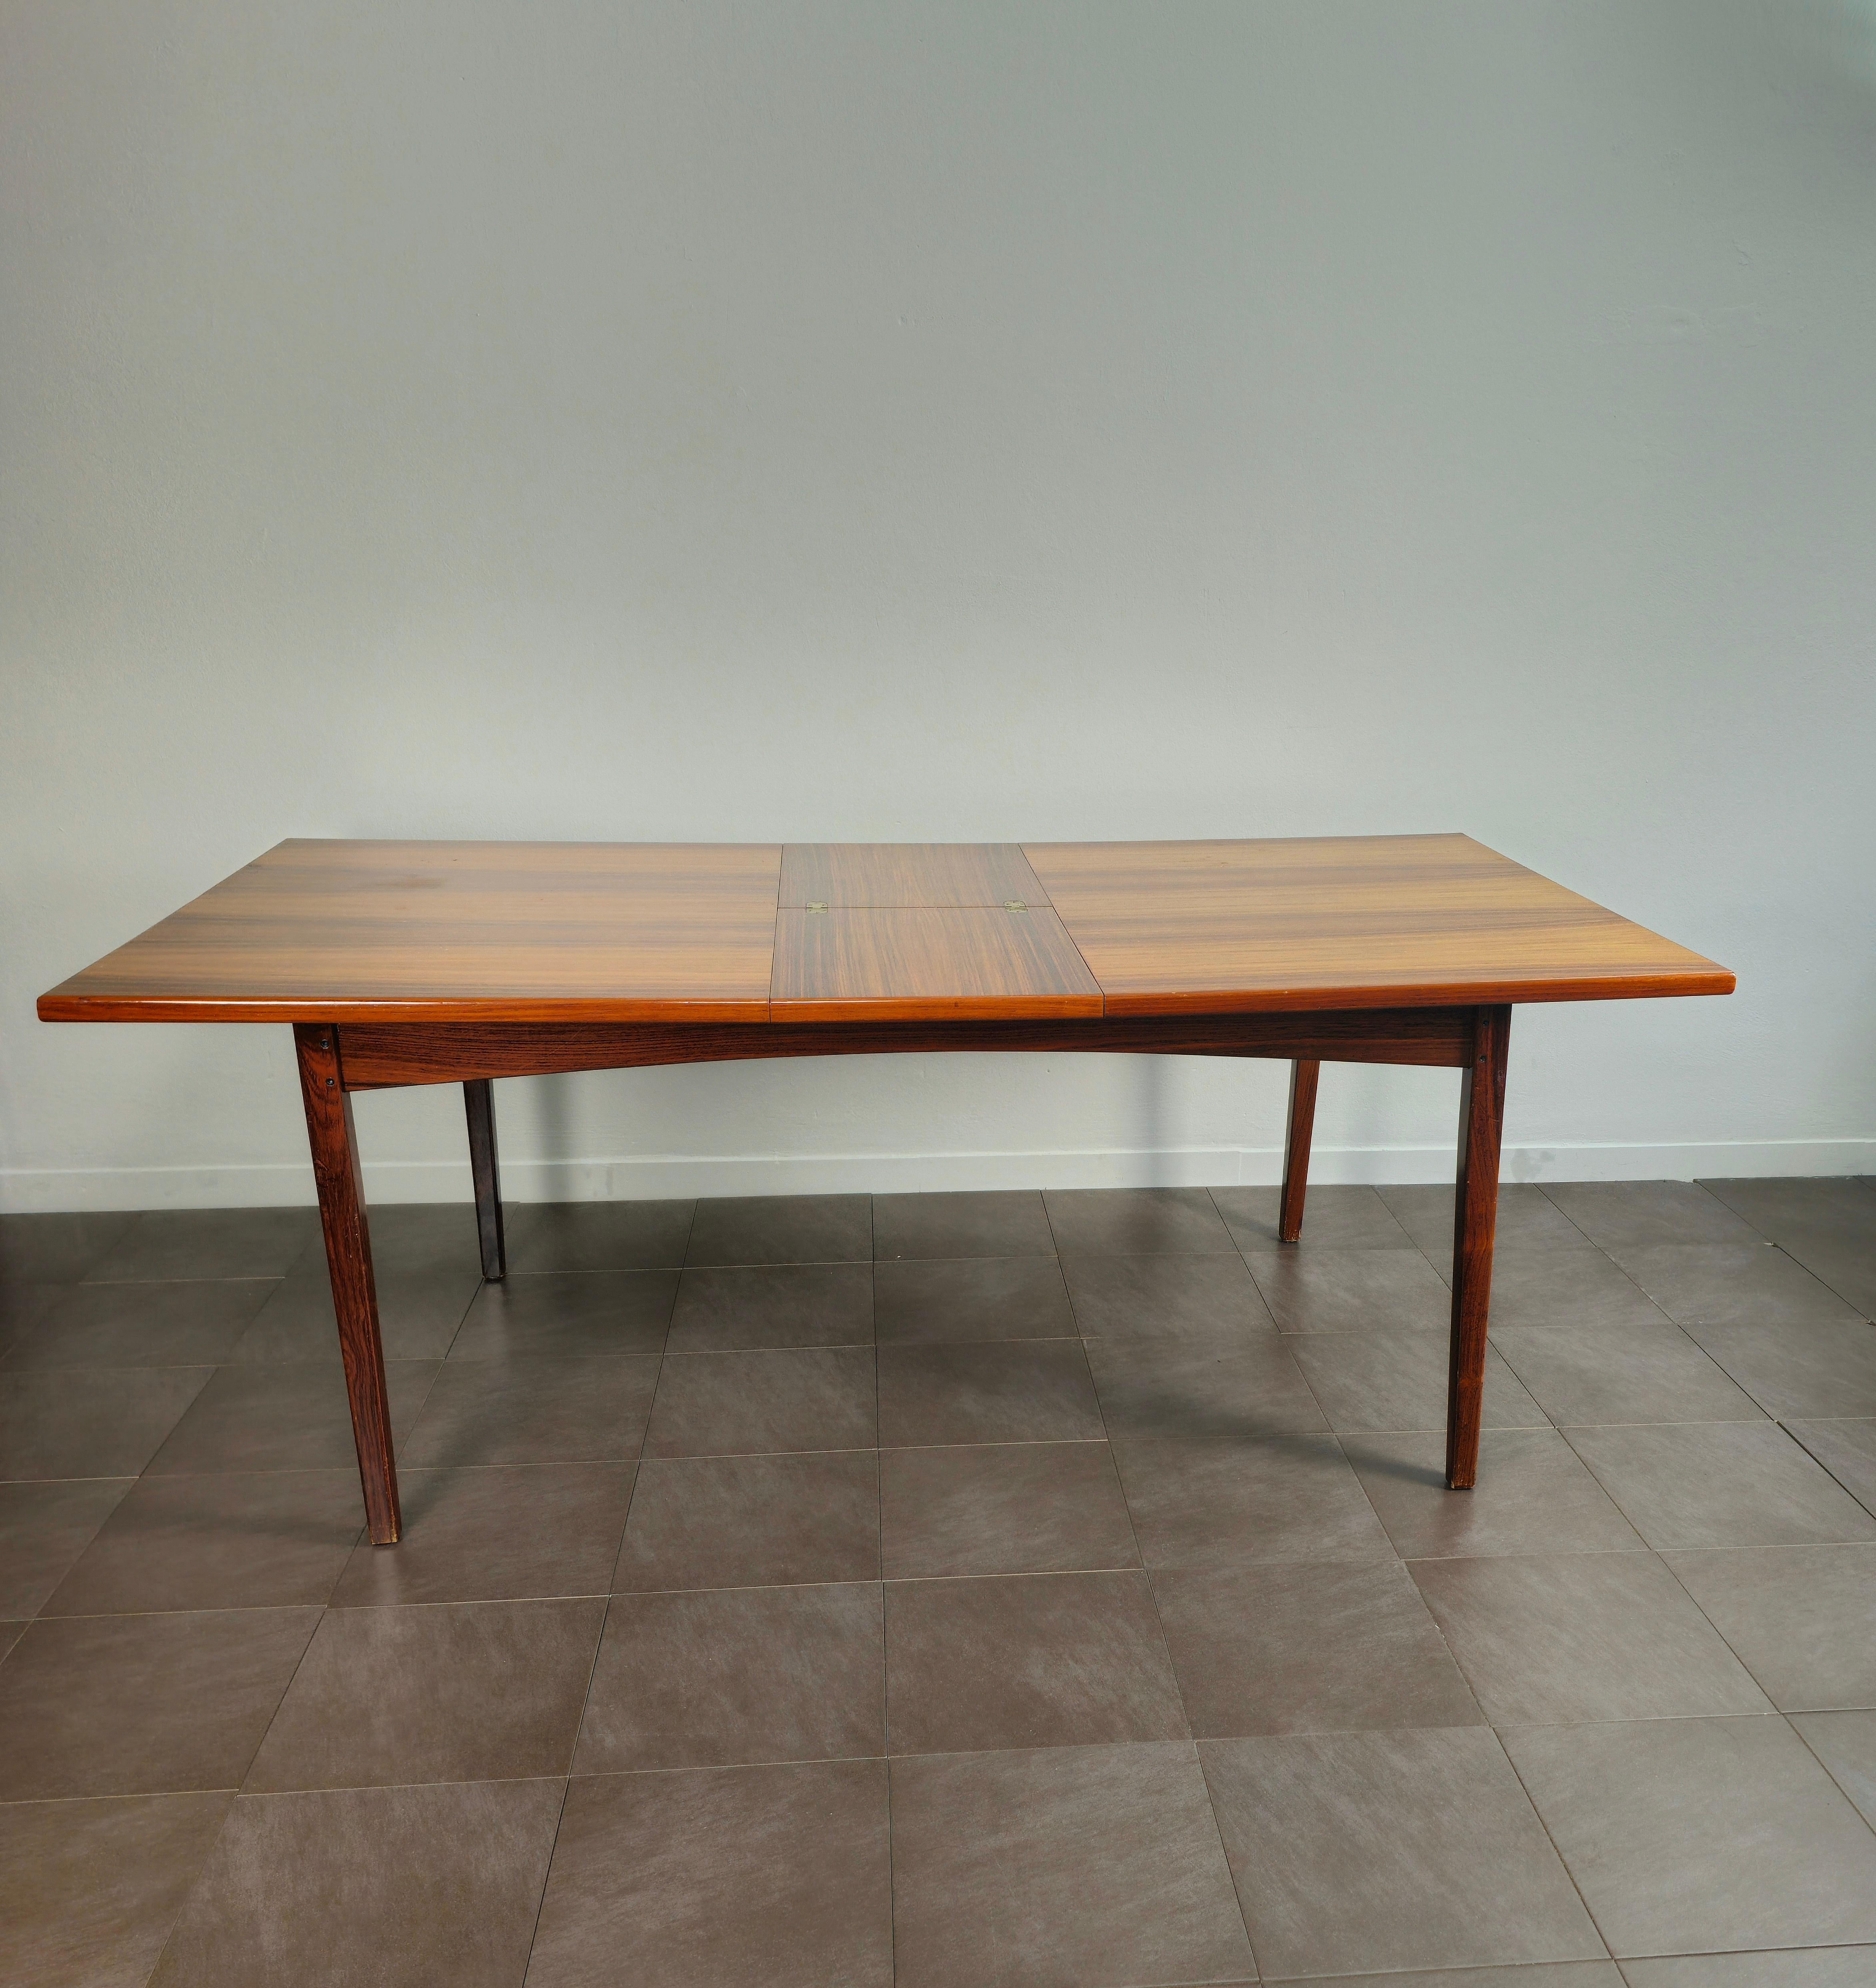 Wood Dining Room Table Extendable Large Rectangular Midcentury, Denmark, 1960s For Sale 1